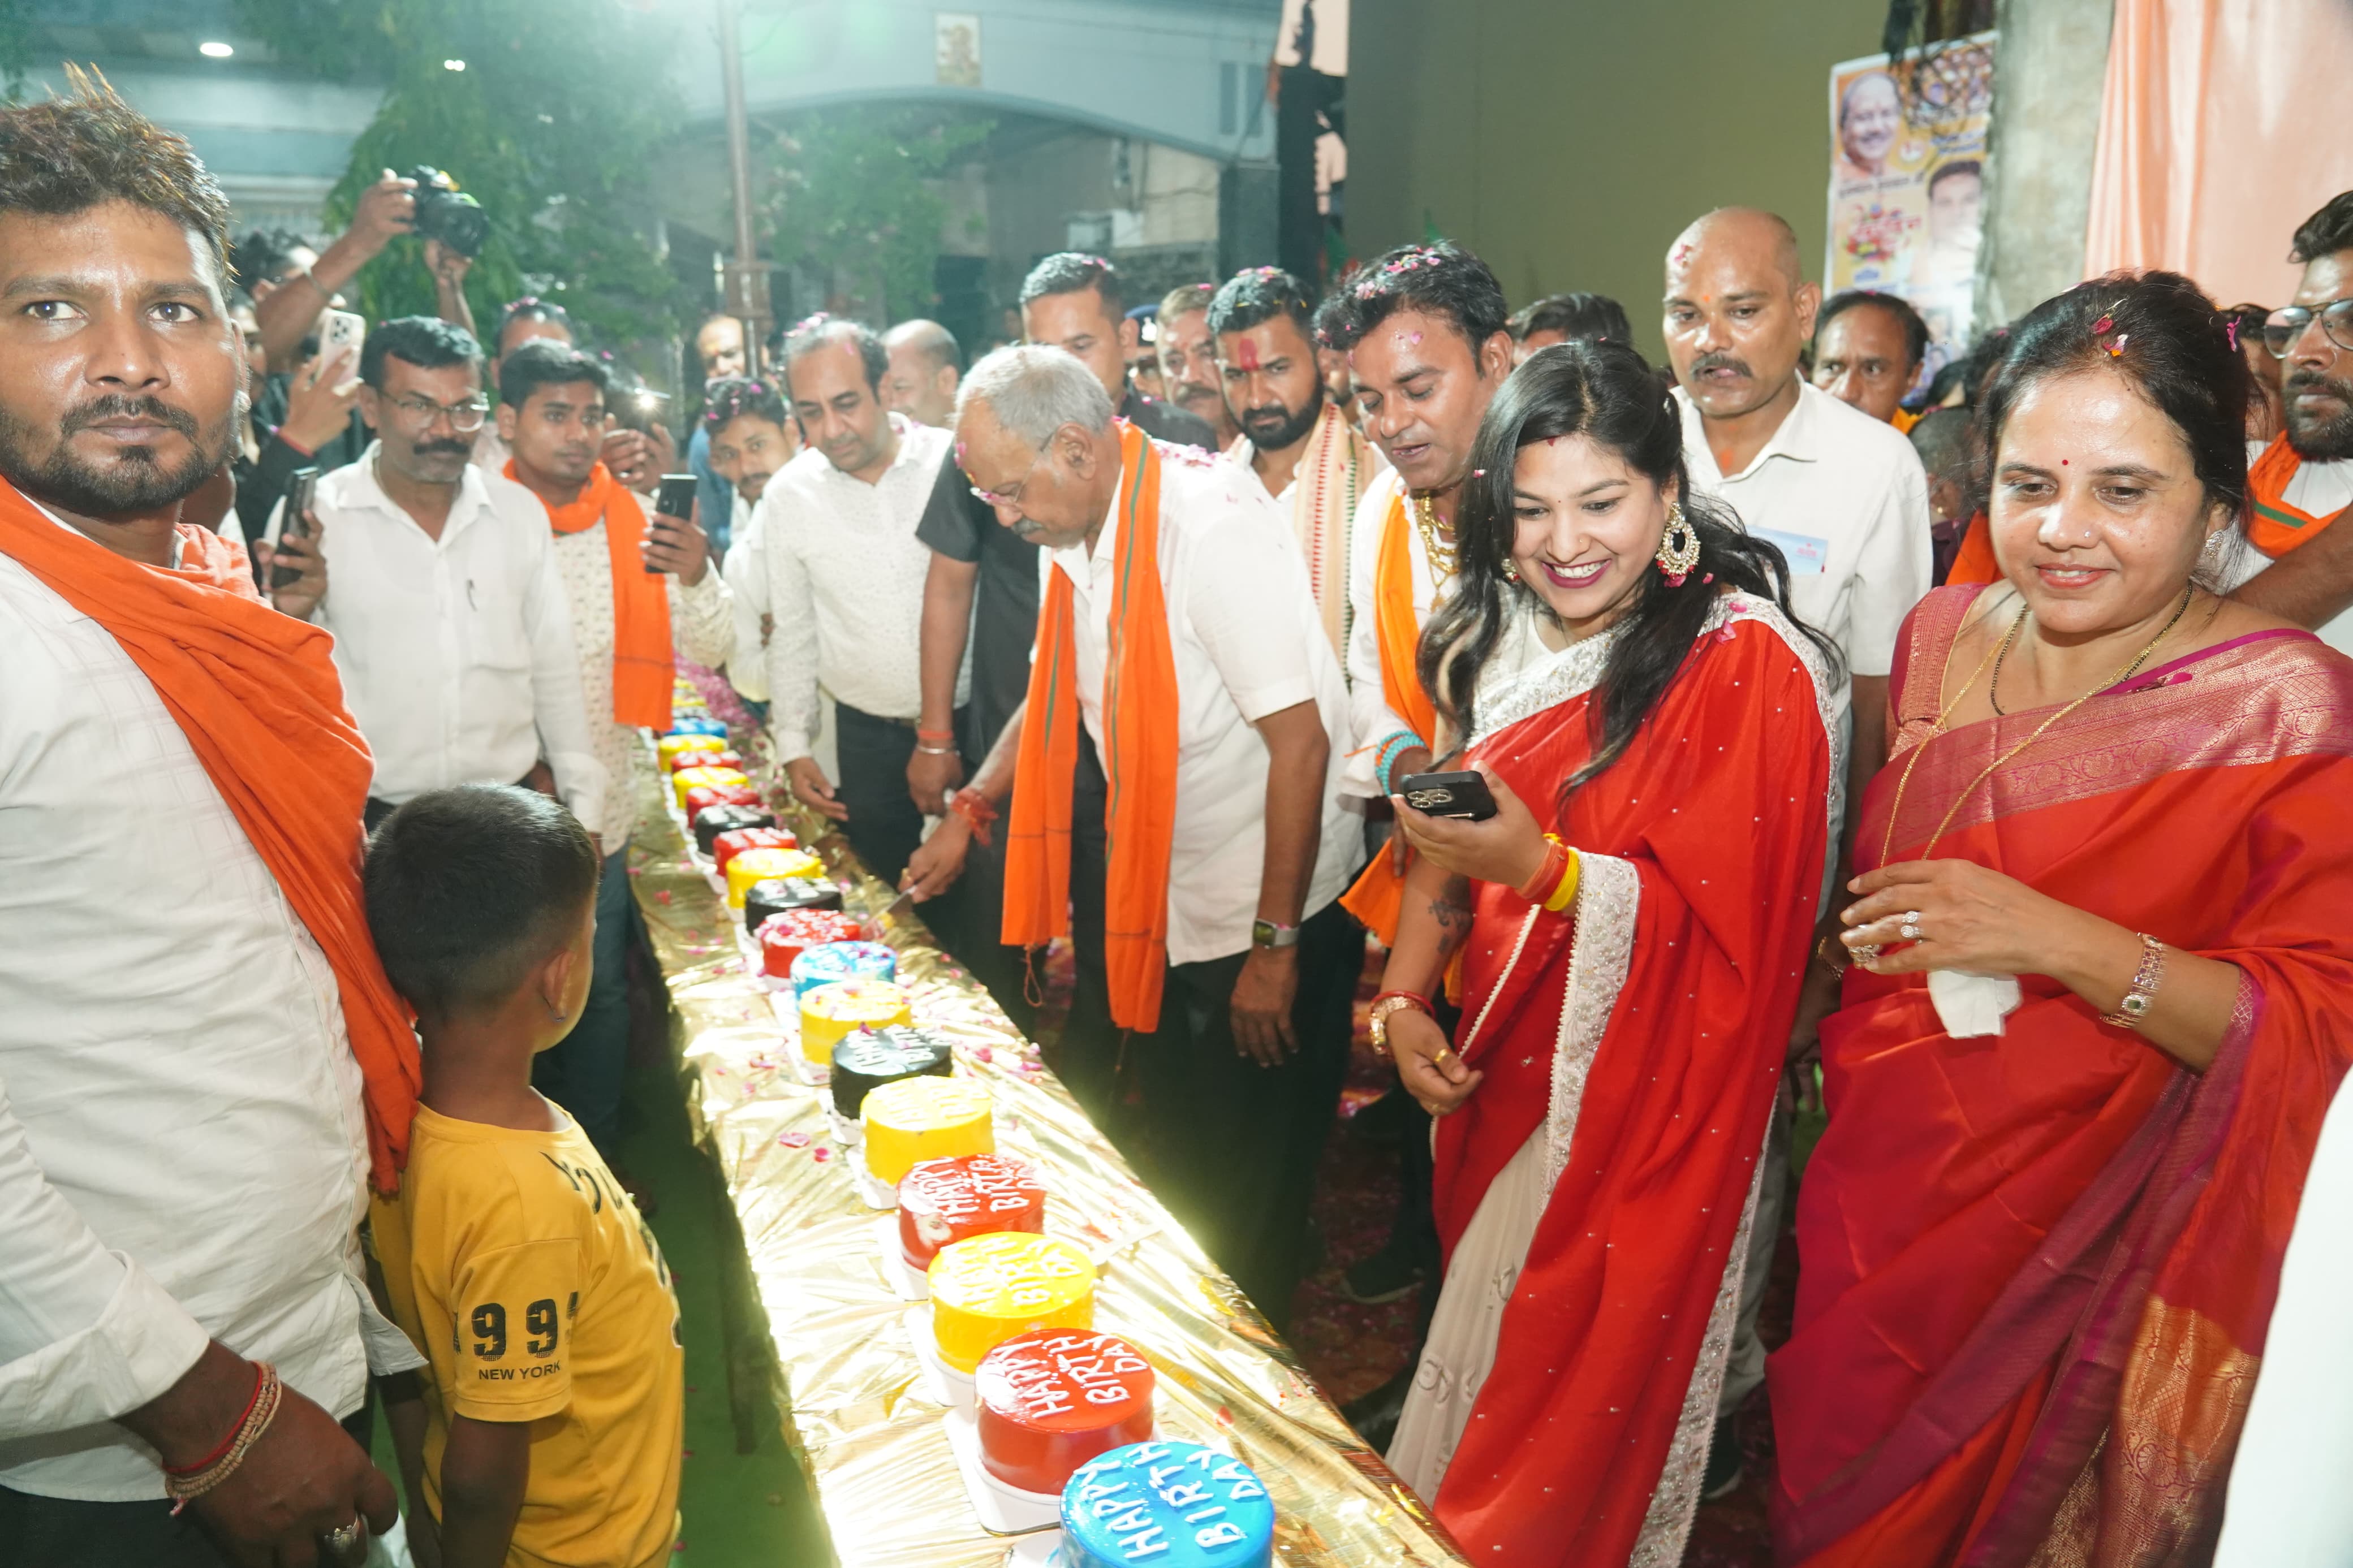 Brijmohan turned 65, fans made him cut 65 cakes, weighed him with laddus, distributed sherbet, havan and pujan were performed, many events were organized at various places, people kept coming to congratulate him at his residence, 1st May is Labor Day, birthday of Chhattisgarh's public leader minister Brijmohan Agarwal, Raipur, Chhattisgarh Khabargali